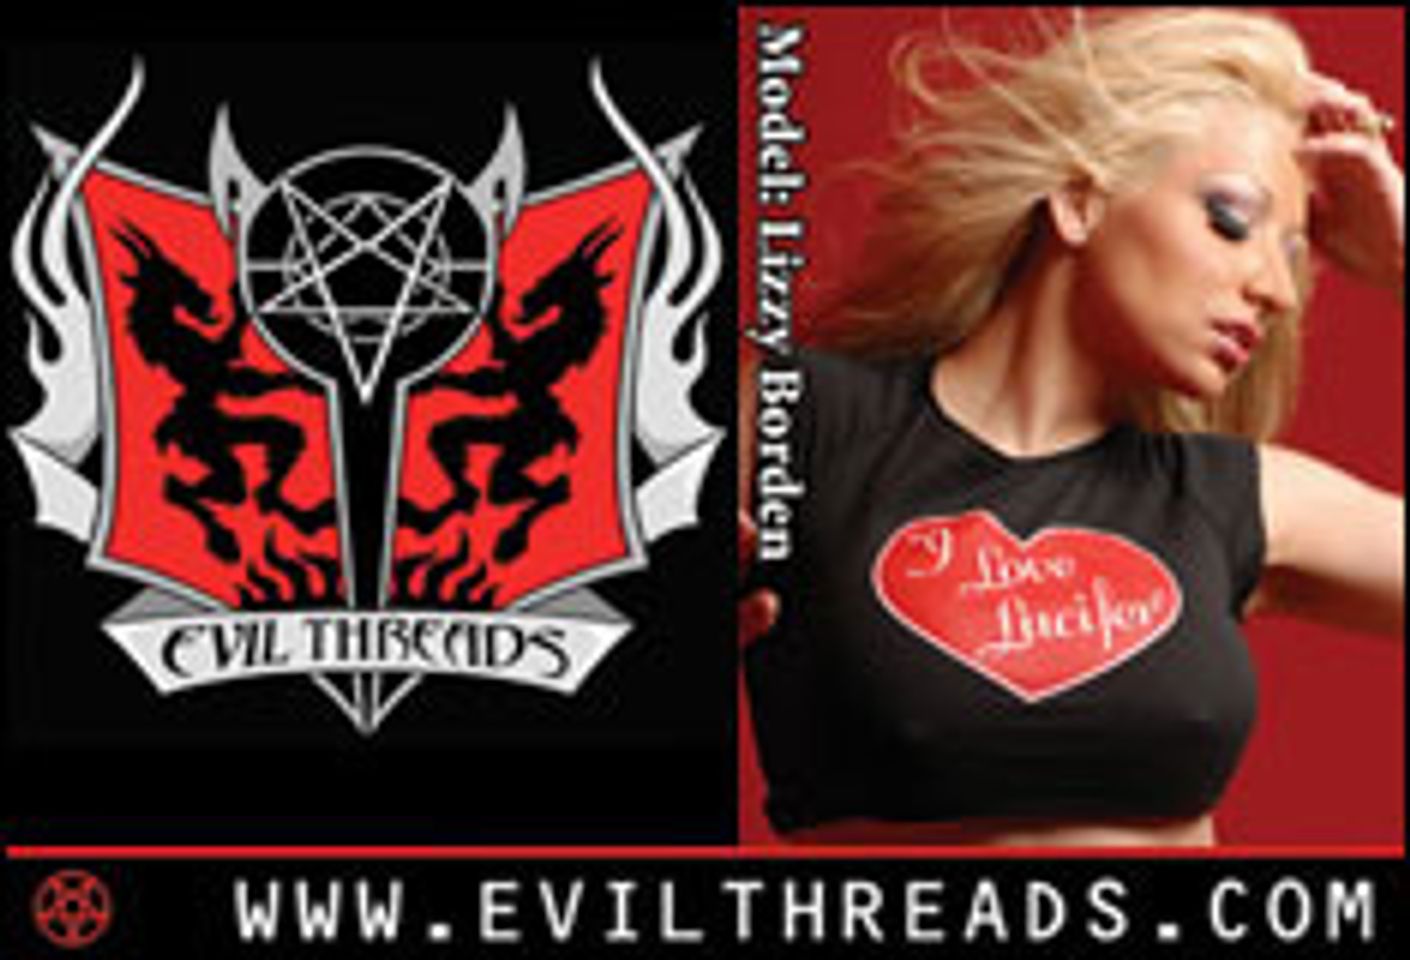 Lizzy Borden Begins Ad Campaign with Evil Threads